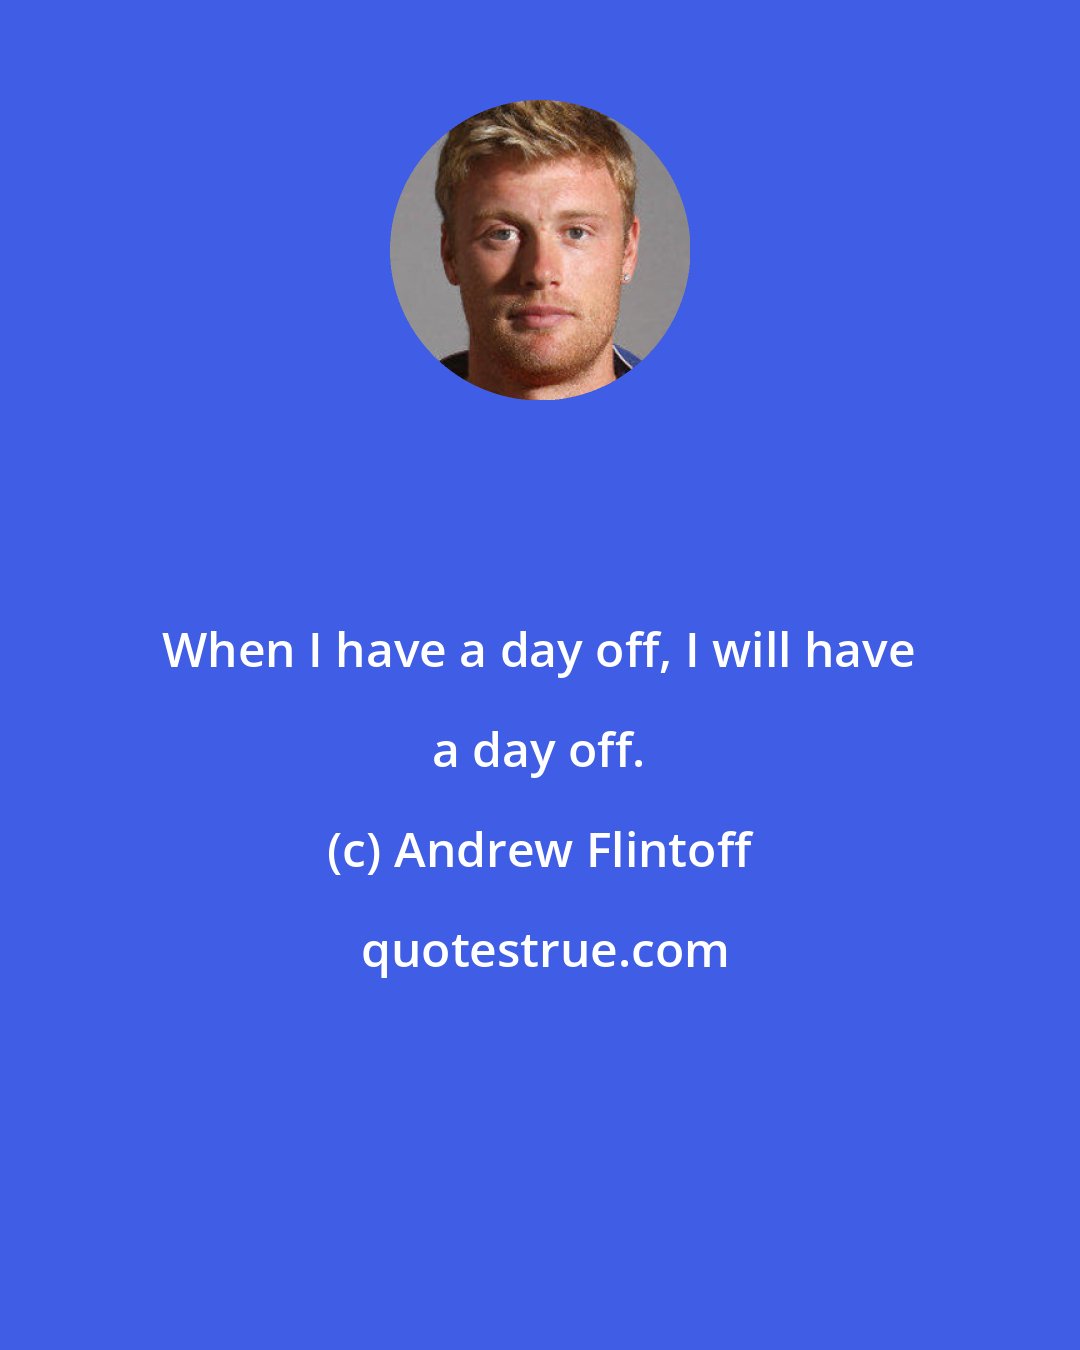 Andrew Flintoff: When I have a day off, I will have a day off.